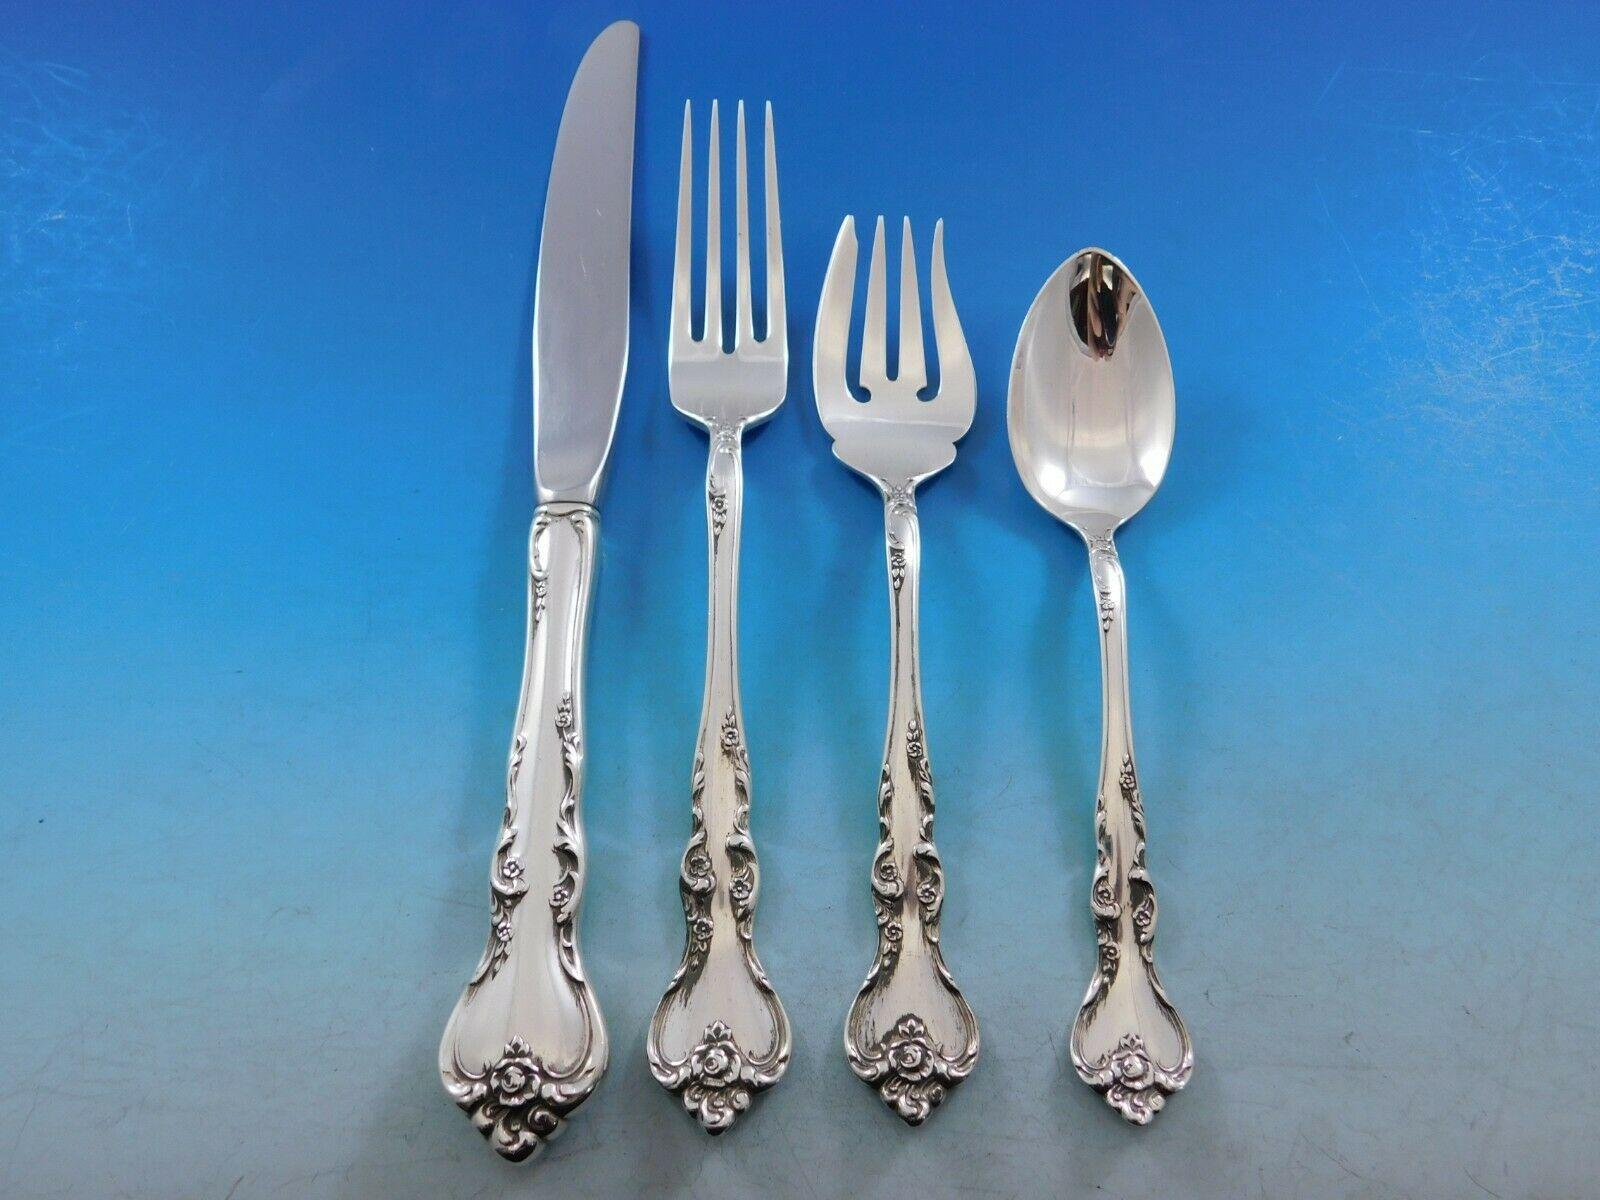 American Savannah by Reed & Barton Sterling Silver Flatware Service for 12 Set 60 Pieces For Sale